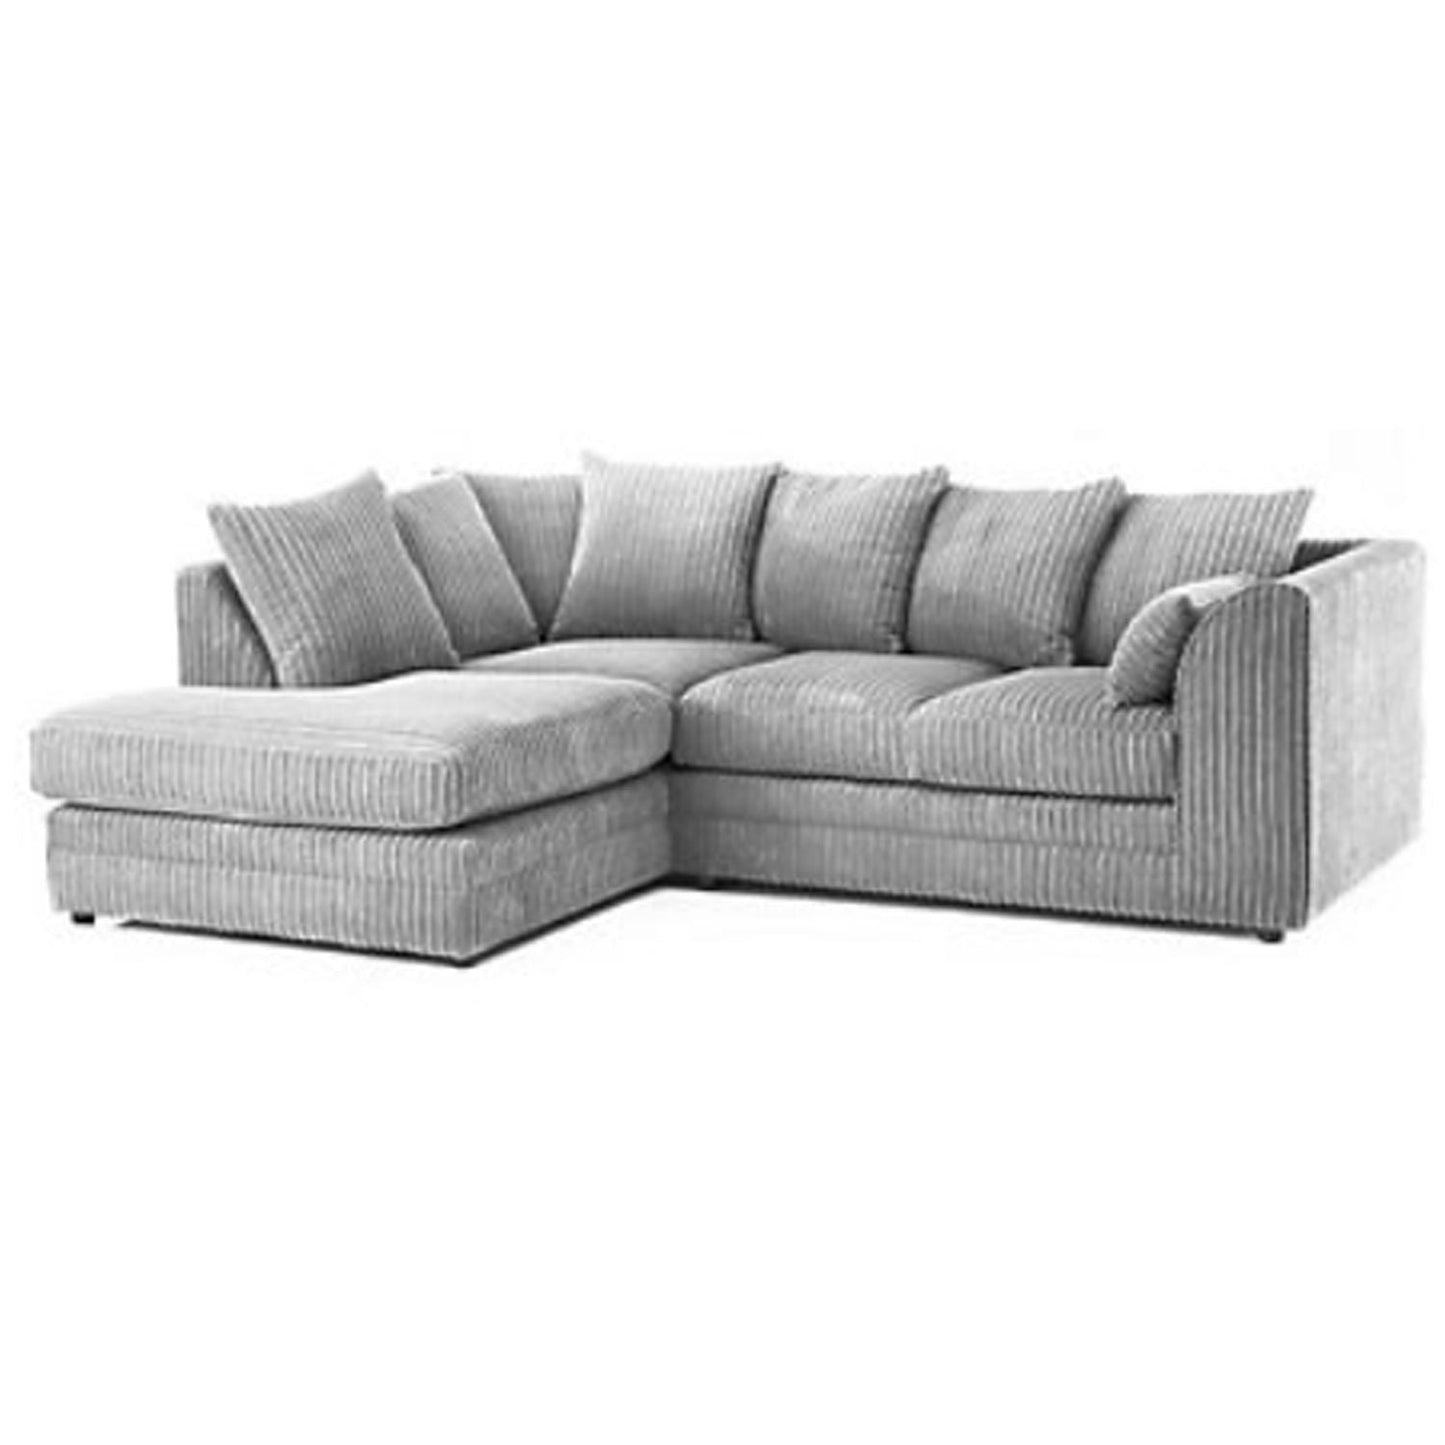 Daniel Jumbo Cord 4 Seater Corner Sofa Coffee - Left and Right Arm - Available in Other Colours